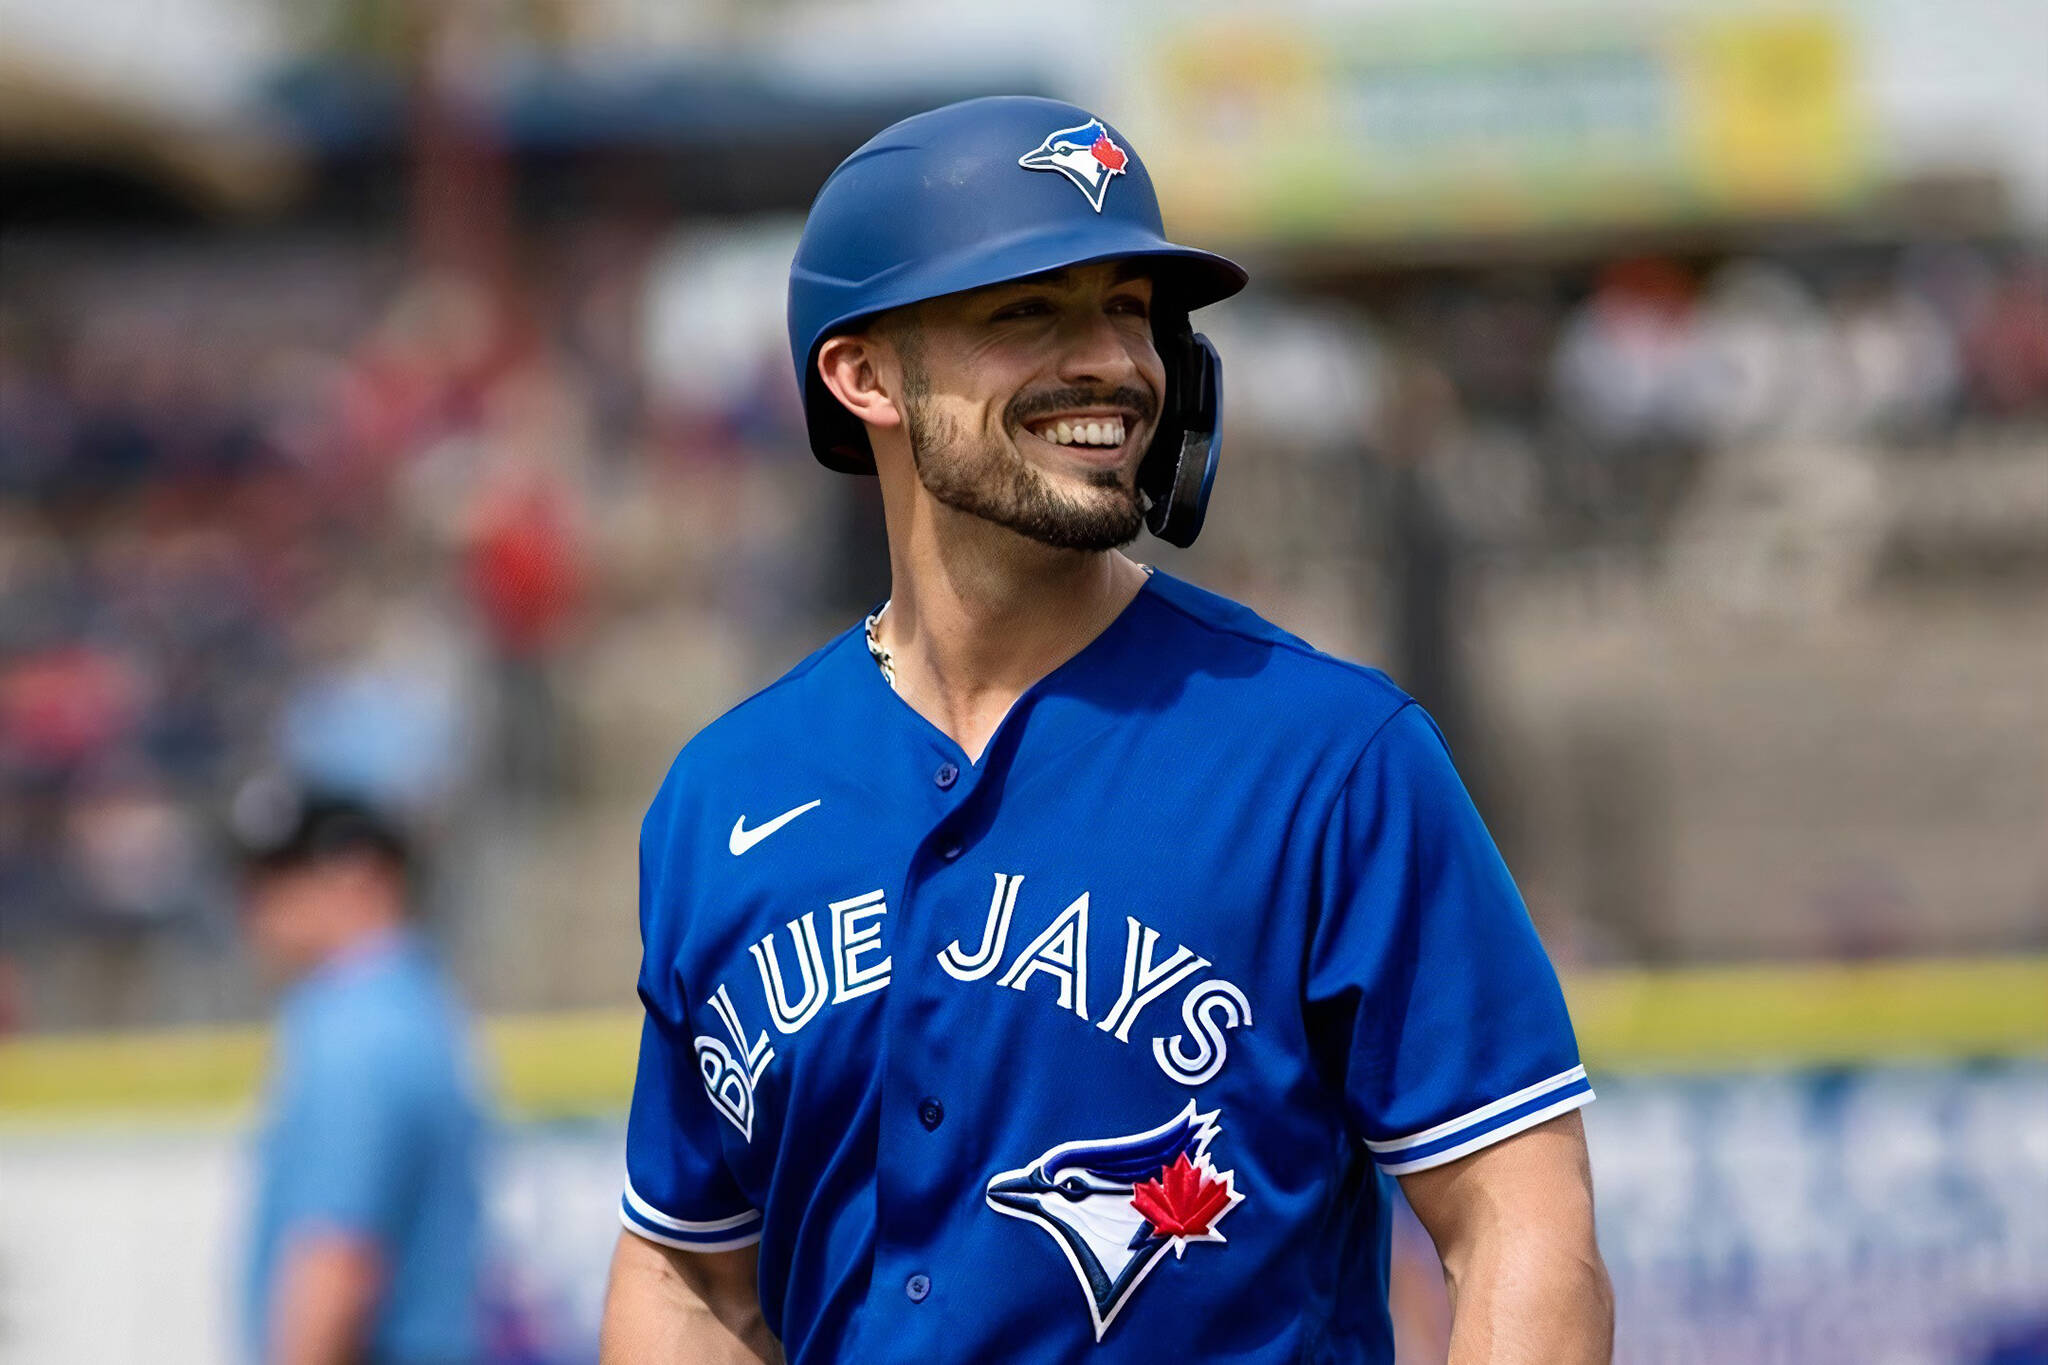 Current and former Toronto Blue Jays get feisty in social media spat